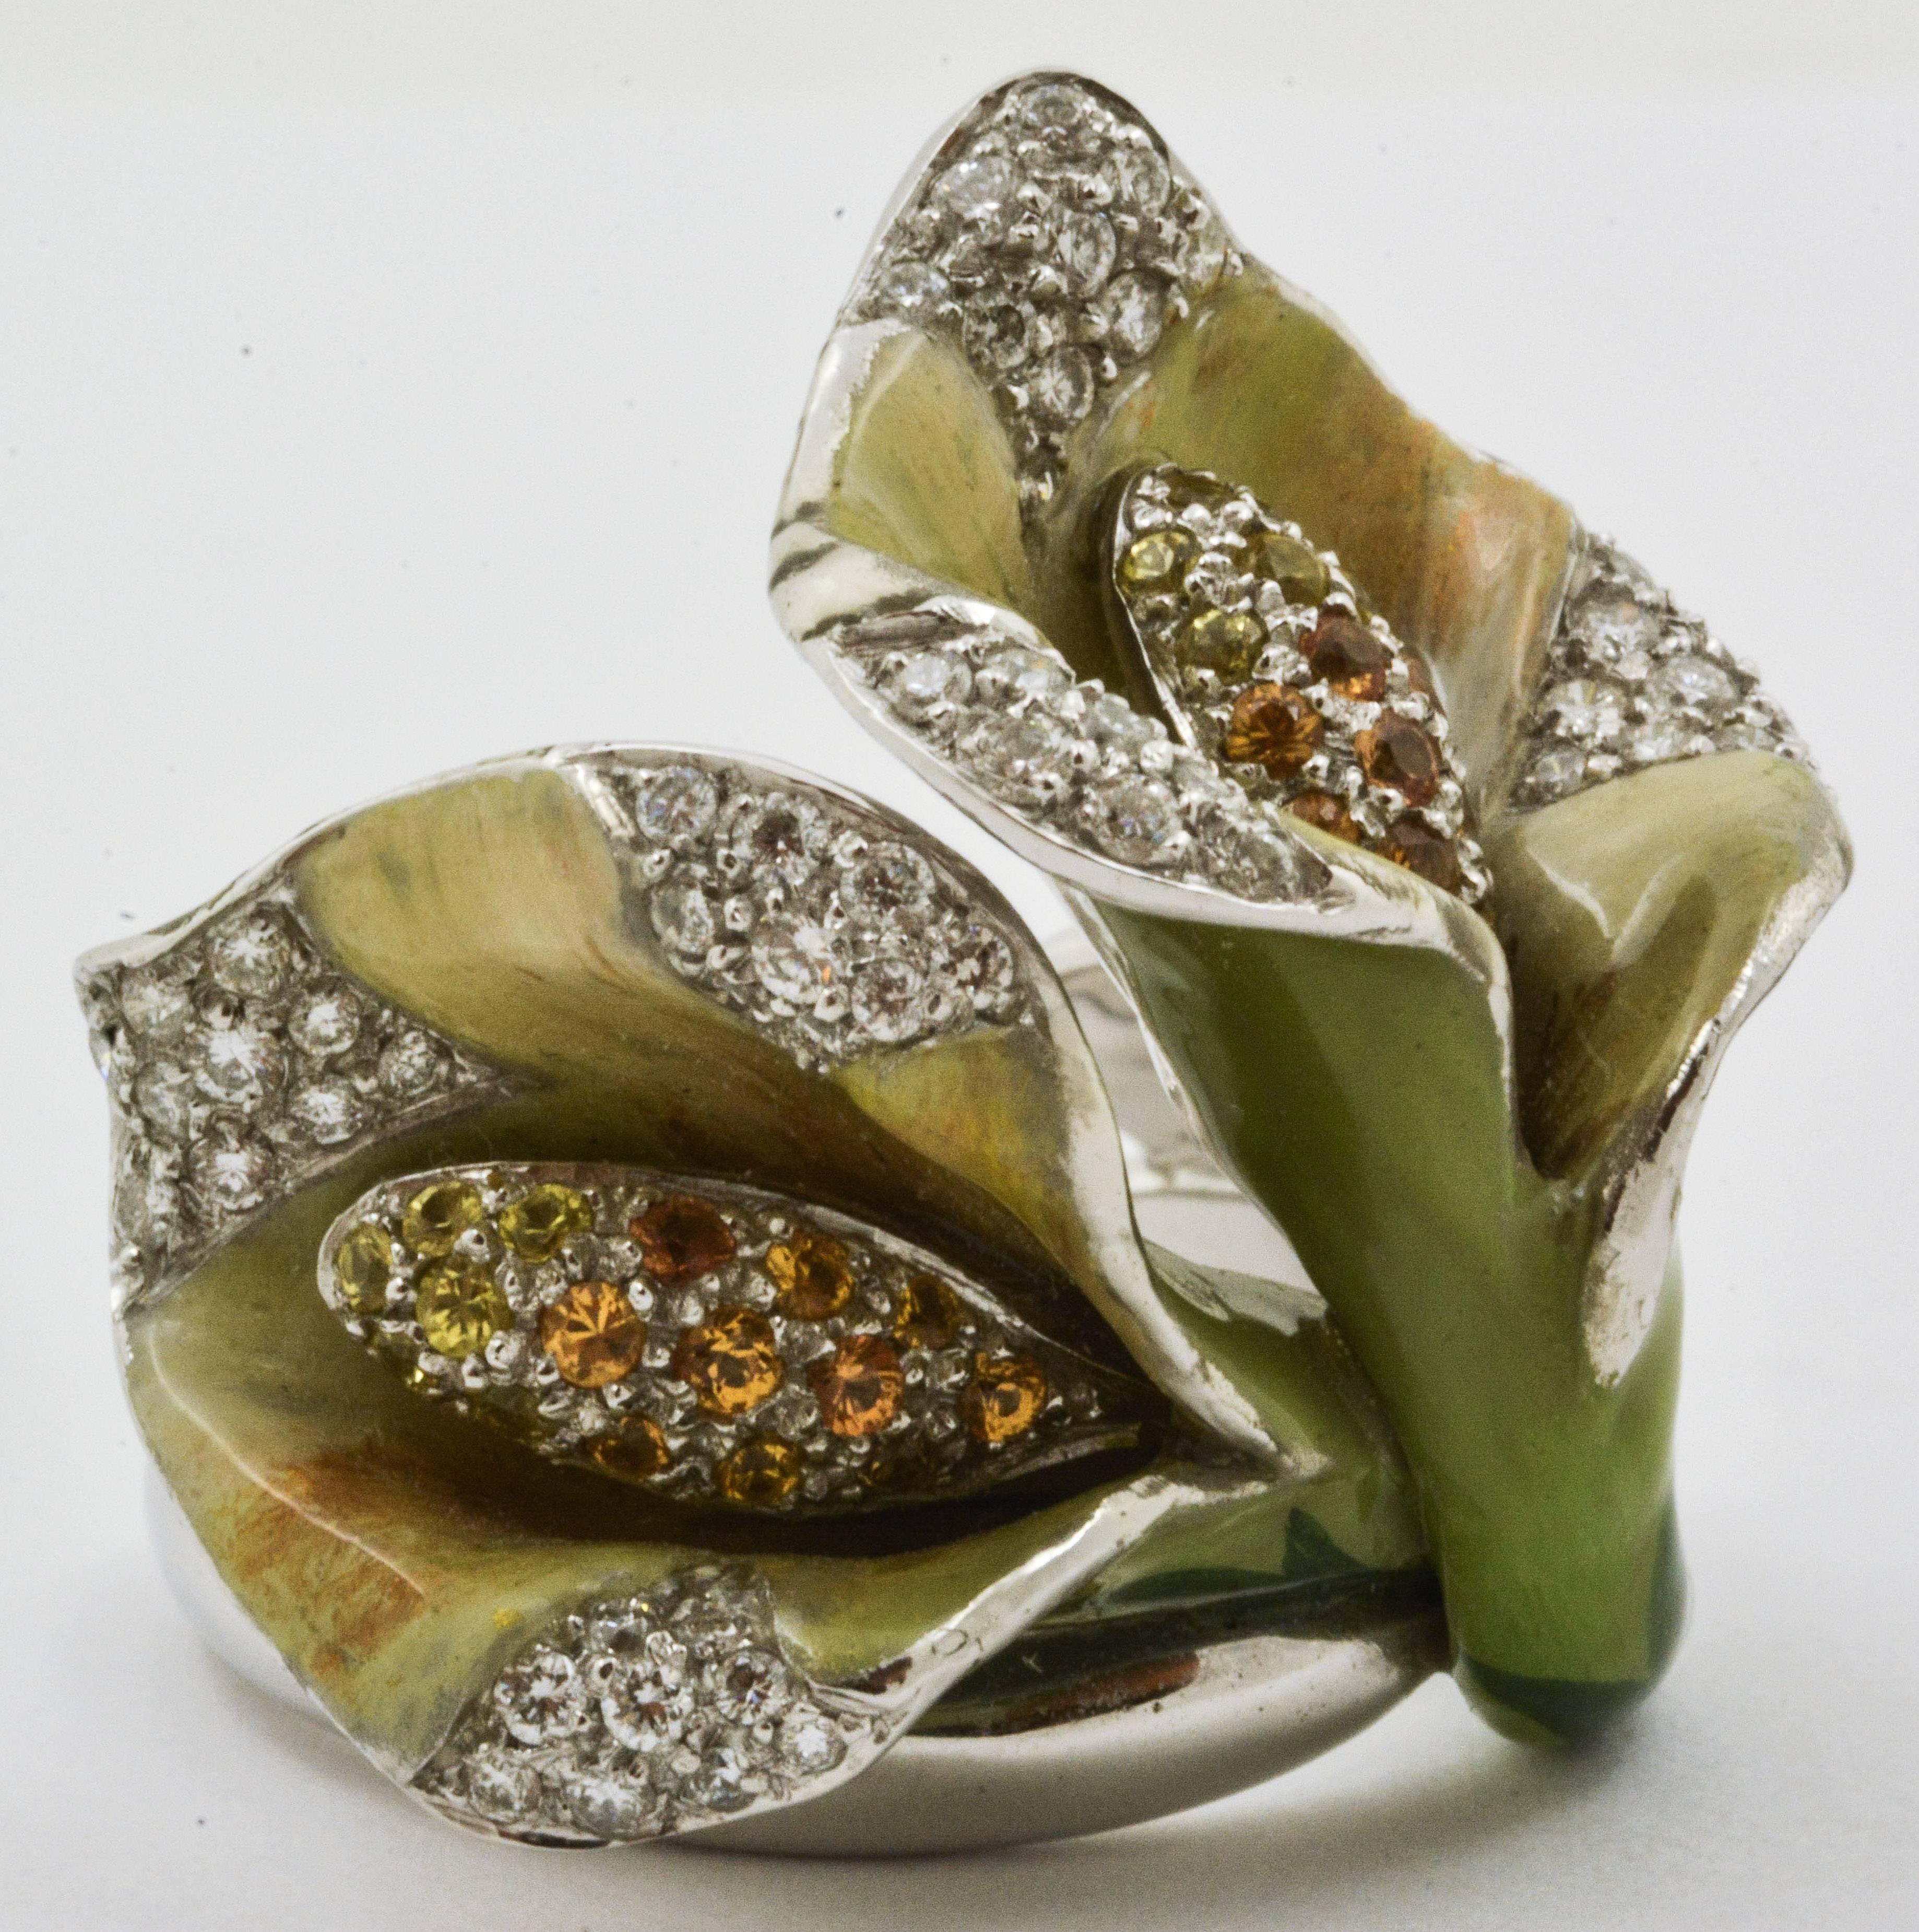 A greenish enamel renders this Calla Lily Flower ring extraordinarily lifelike. The edges of the design are pave set with round brilliant cut diamonds (weight 0.57 carats, internal clarity VS, color G-H), which draw the eye towards the orange and